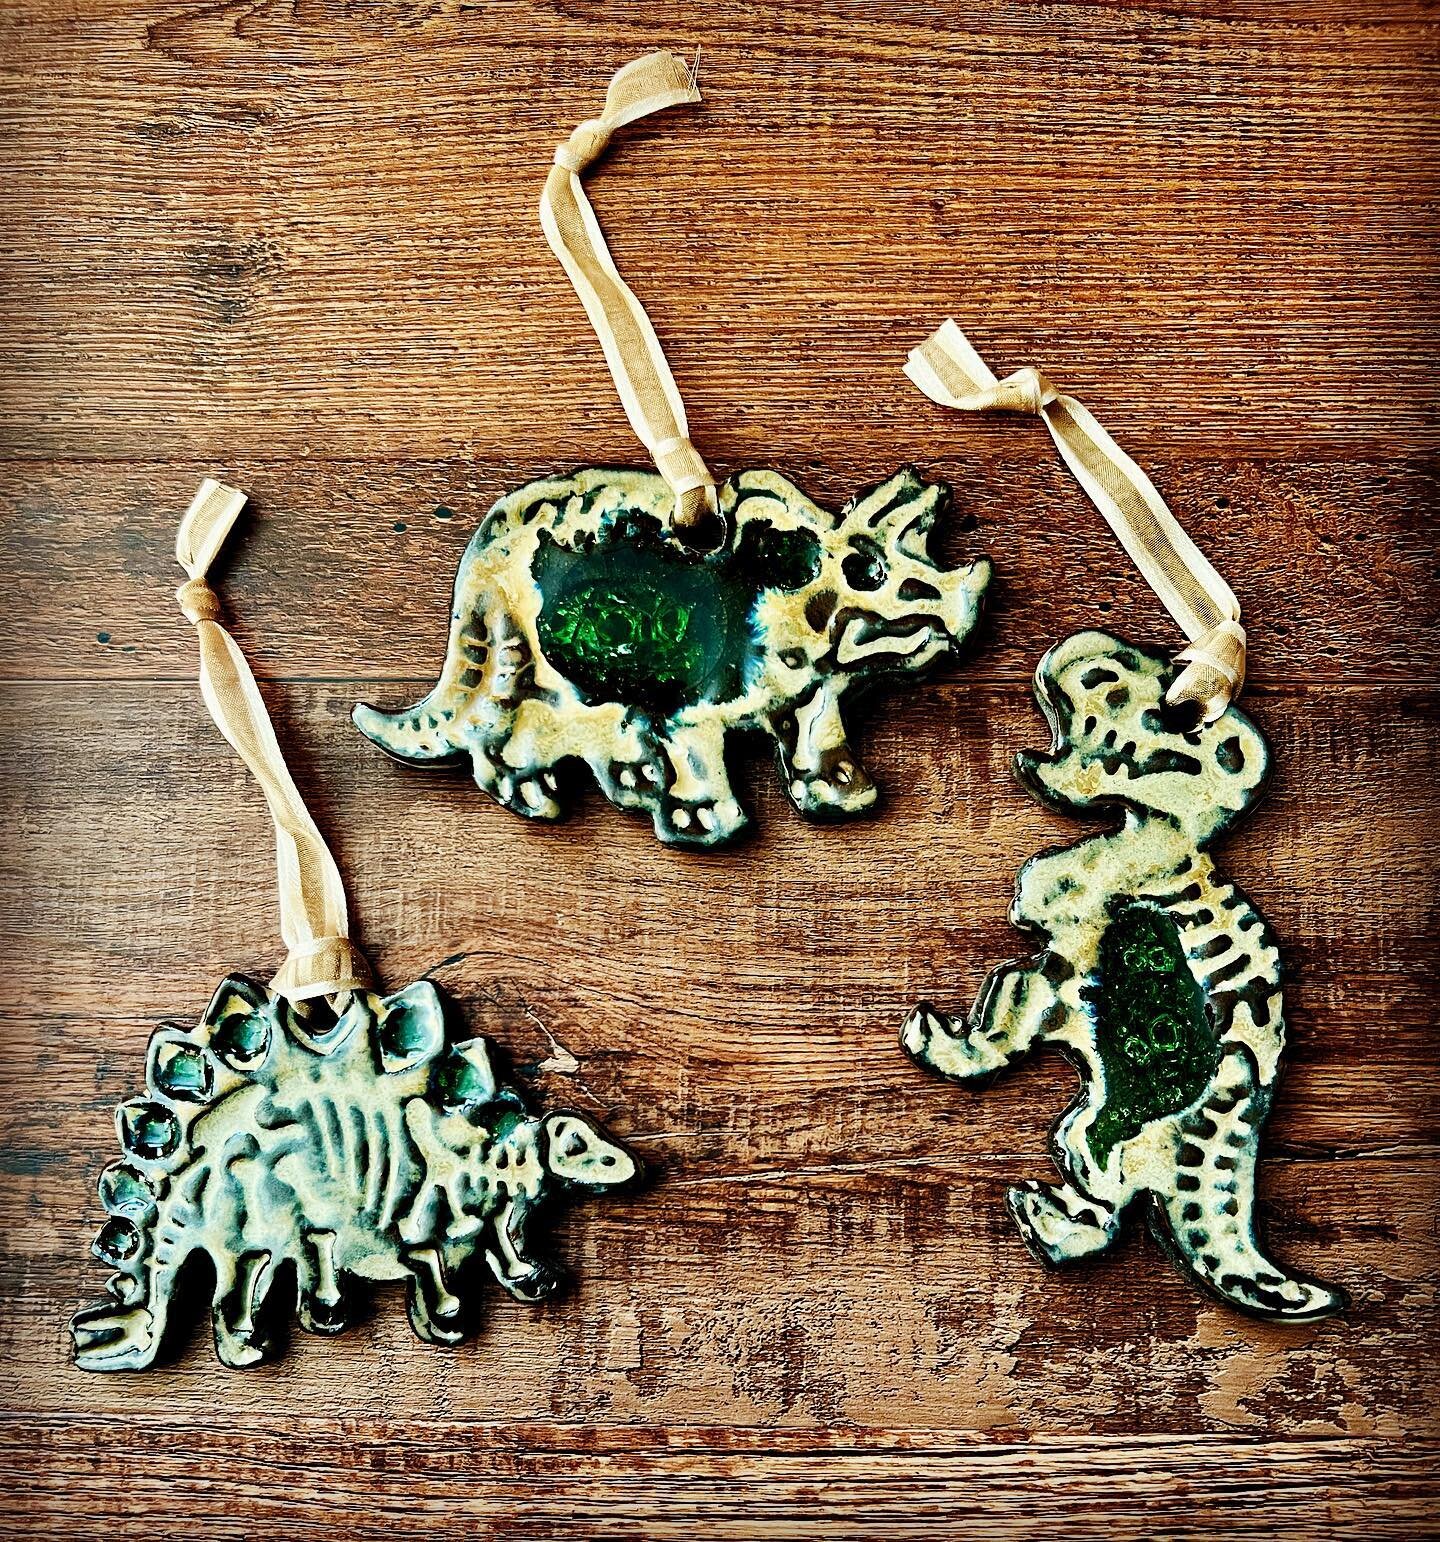 My newest #ornaments this year!  I love #dinosaurs soo much!  And exploding whale in my kiln took a few out (something about that sentence just seems right) so I only have a few available at the moment. Message me if you want one before my show this 